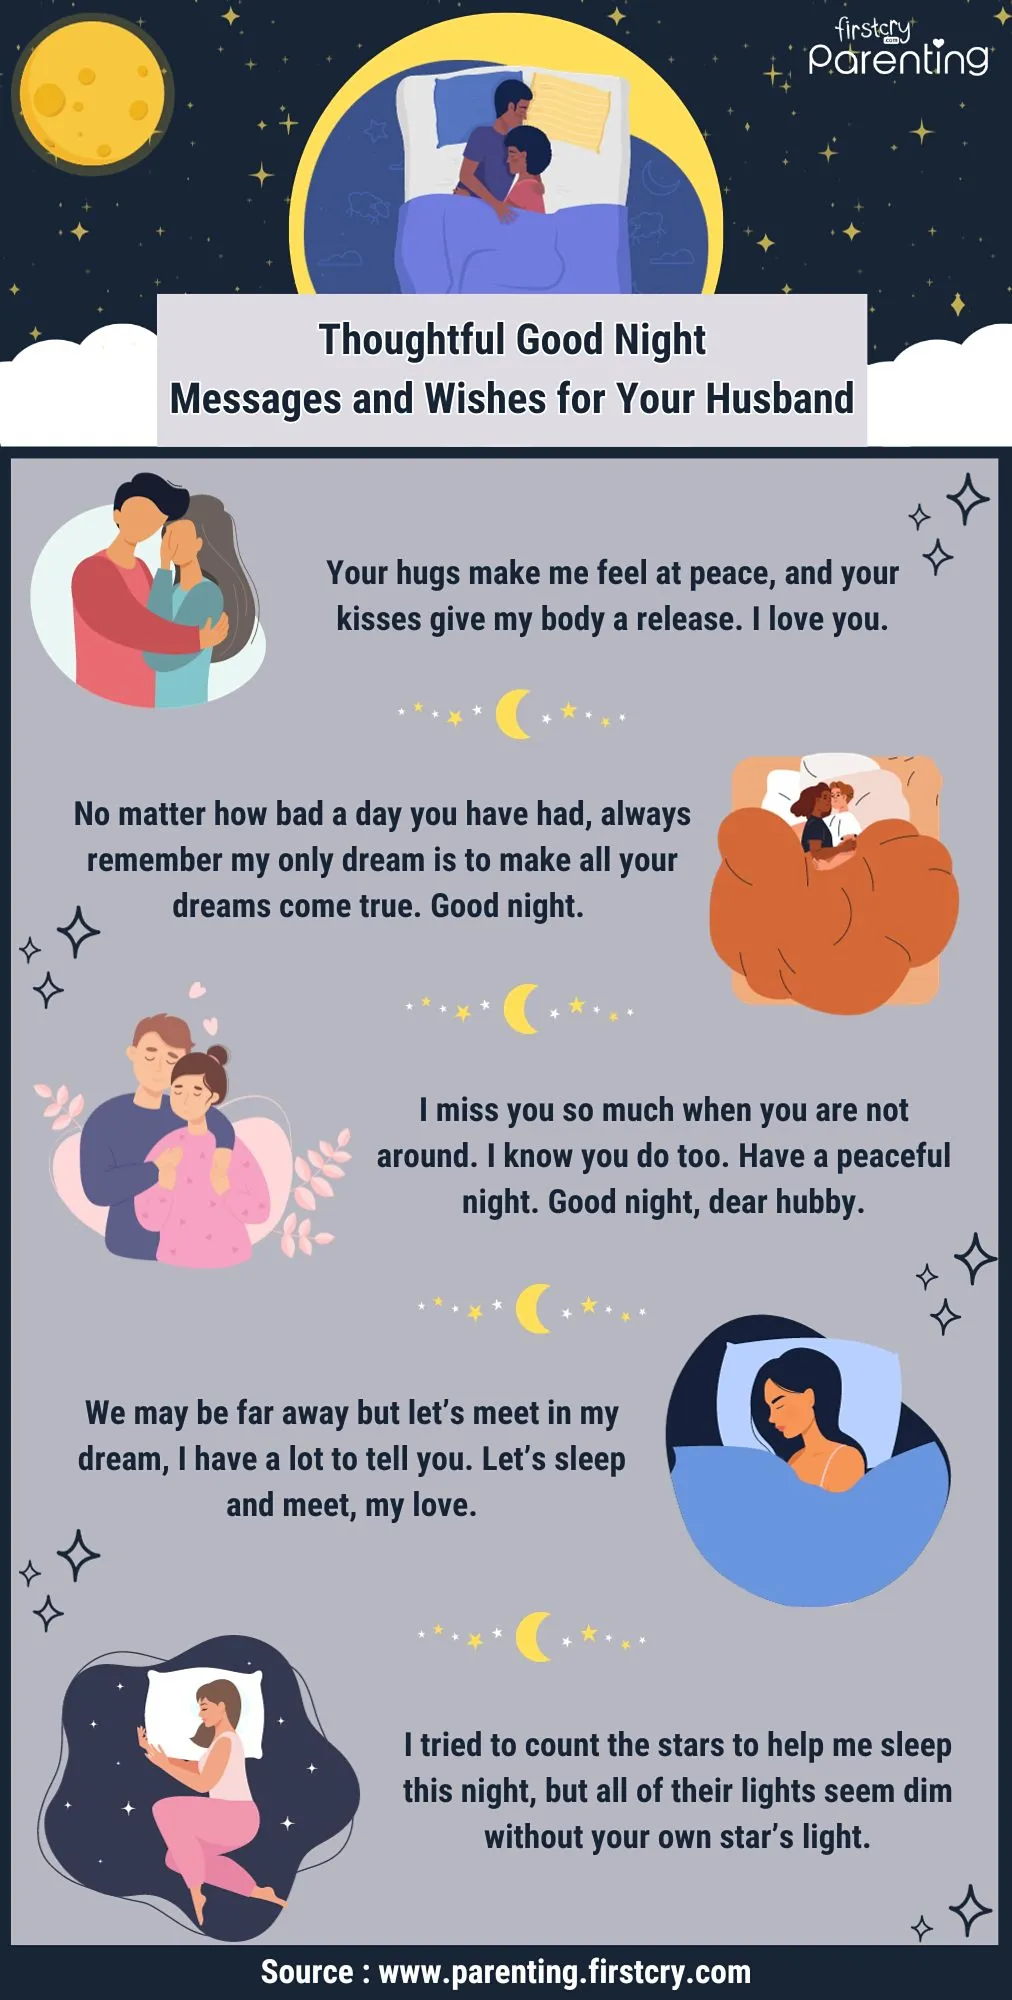 Thoughtful Good Night Messages and Wishes for Your Husband - Infographic